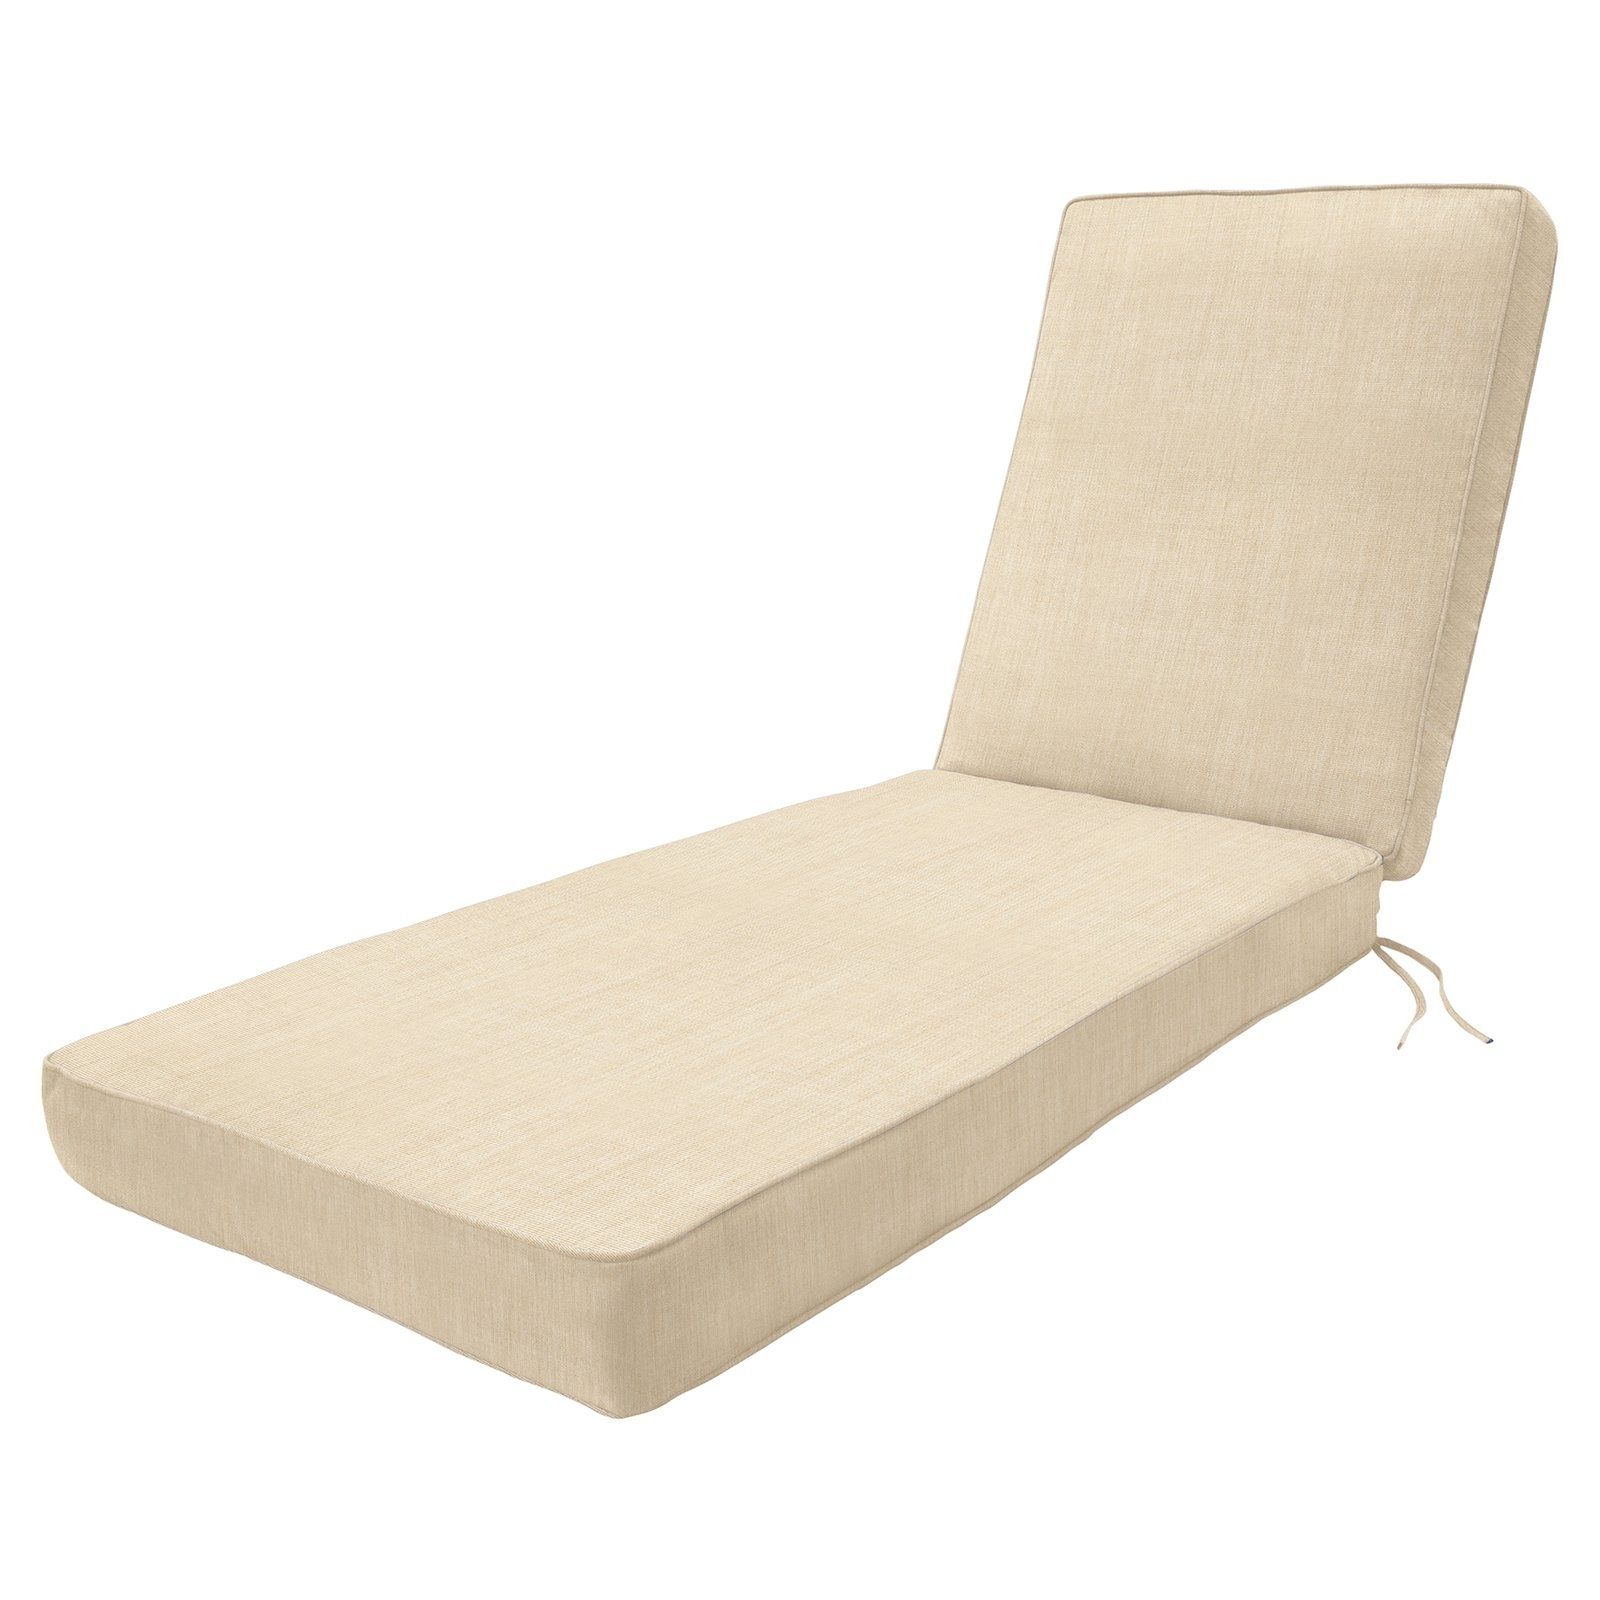 Trendy Eddie Bauer Sunbrella Chaise Lounge Cushion – Double Piped (View 10 of 15)